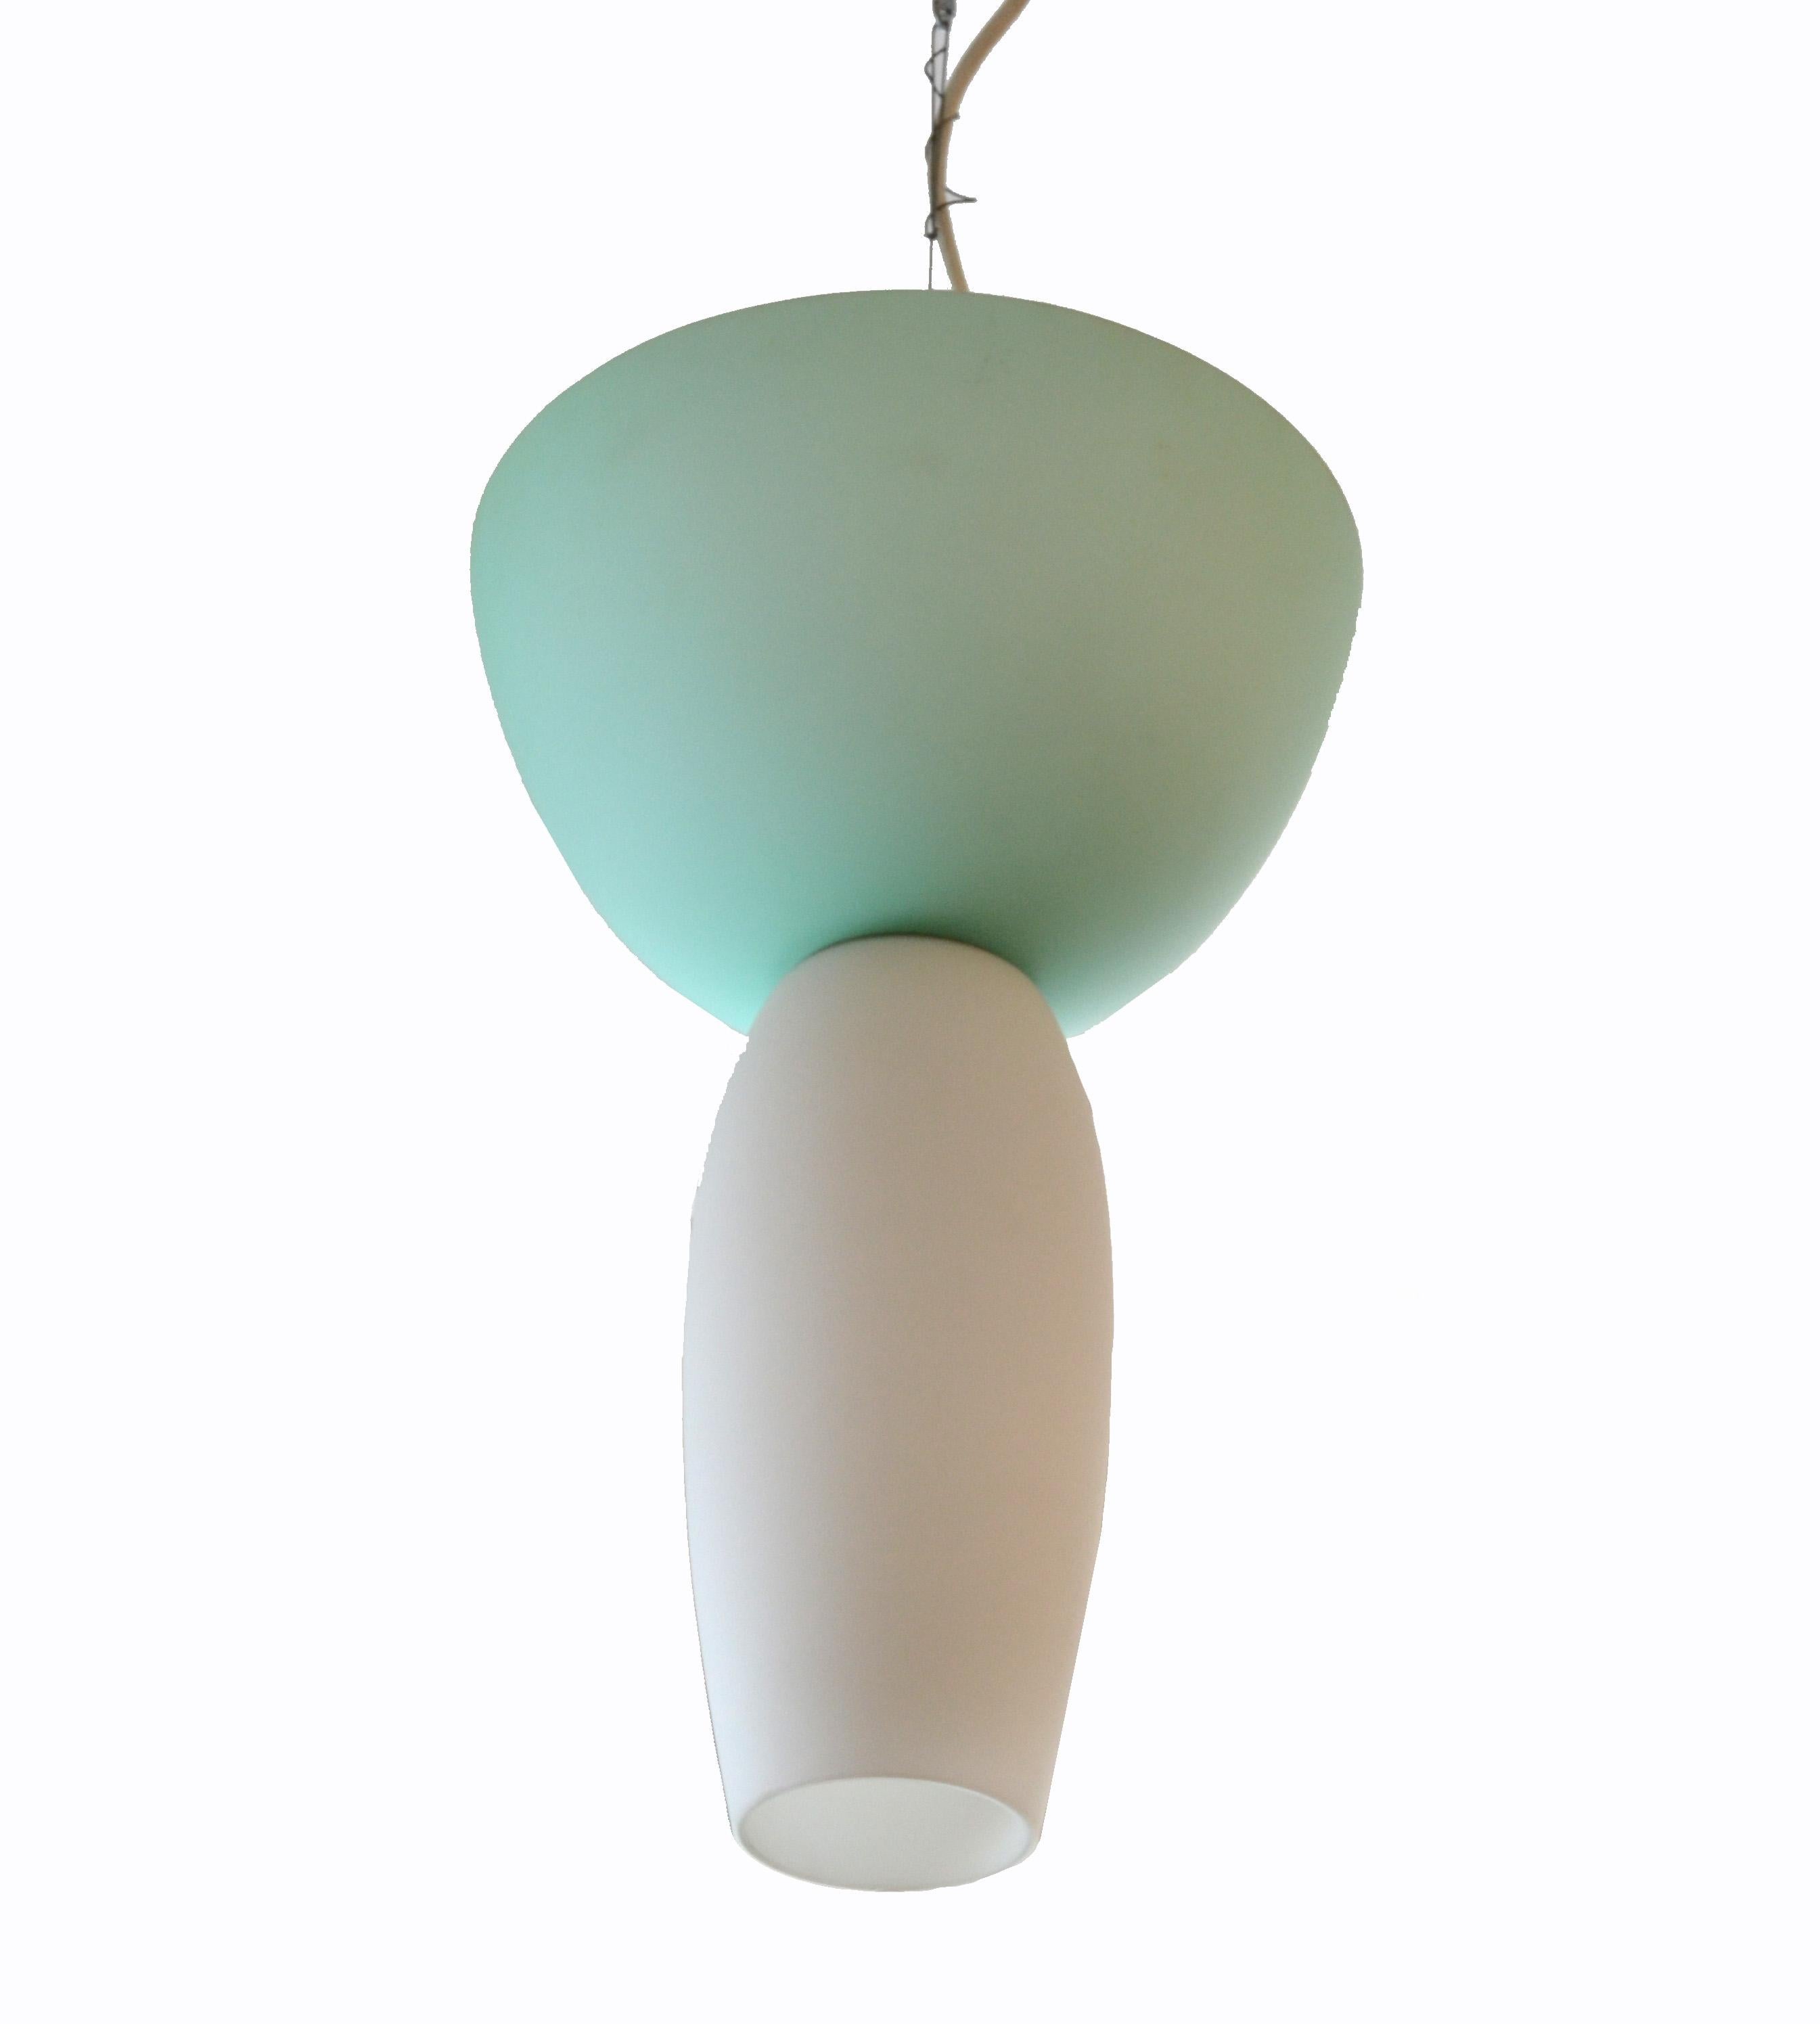 Rodolfo Dordoni Musa Murano pendant light for Artemide, Italy .
Handcrafted white and green Murano glass elements from 1994.
The top socket takes 3 light bulbs and the bottom socket 1 light bulb.
It is in perfect working condition and wired for